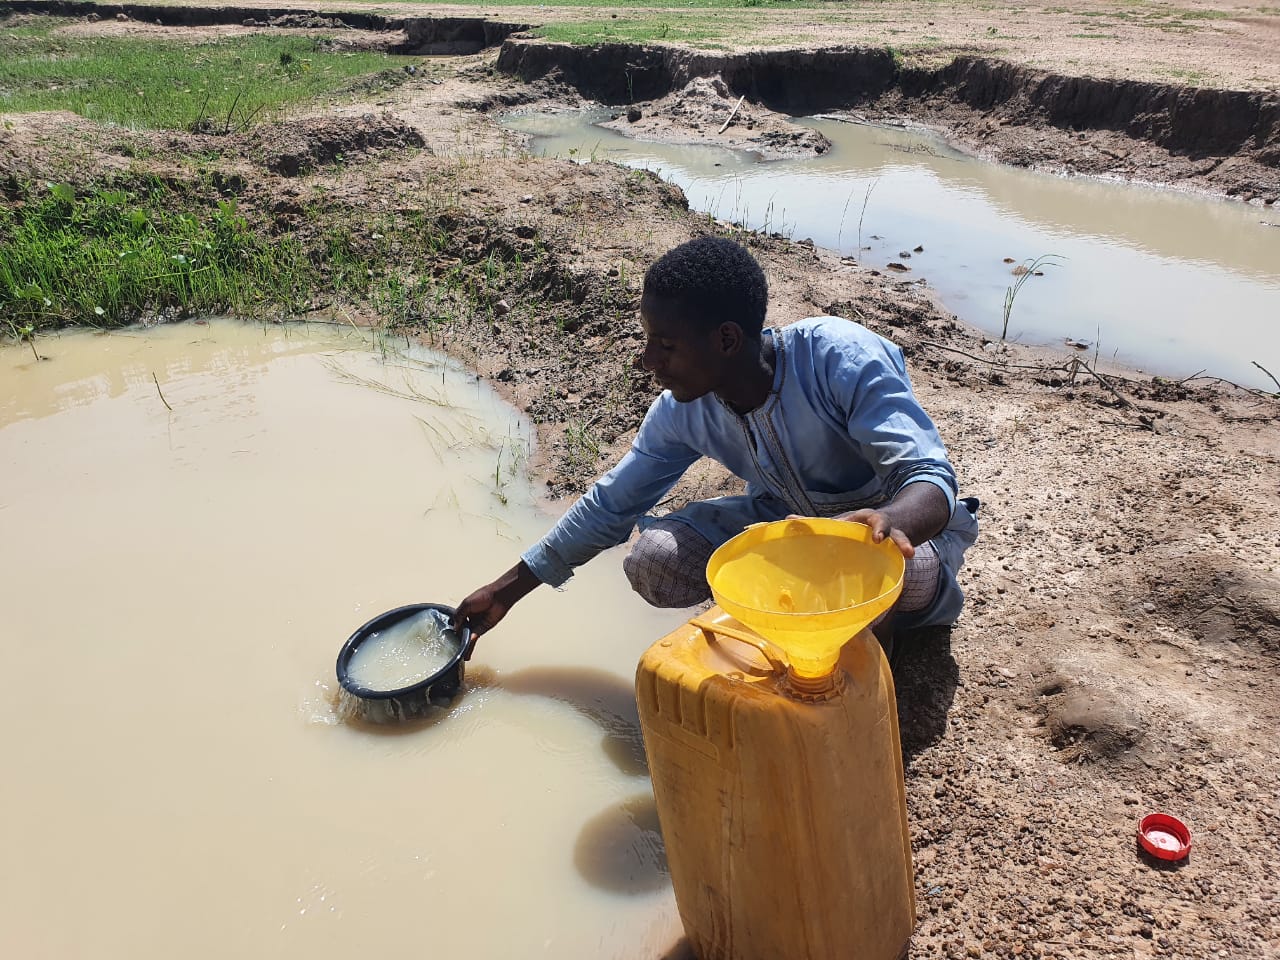 A resident is fetching water from a pond. PC: Lukman Abdulamlik